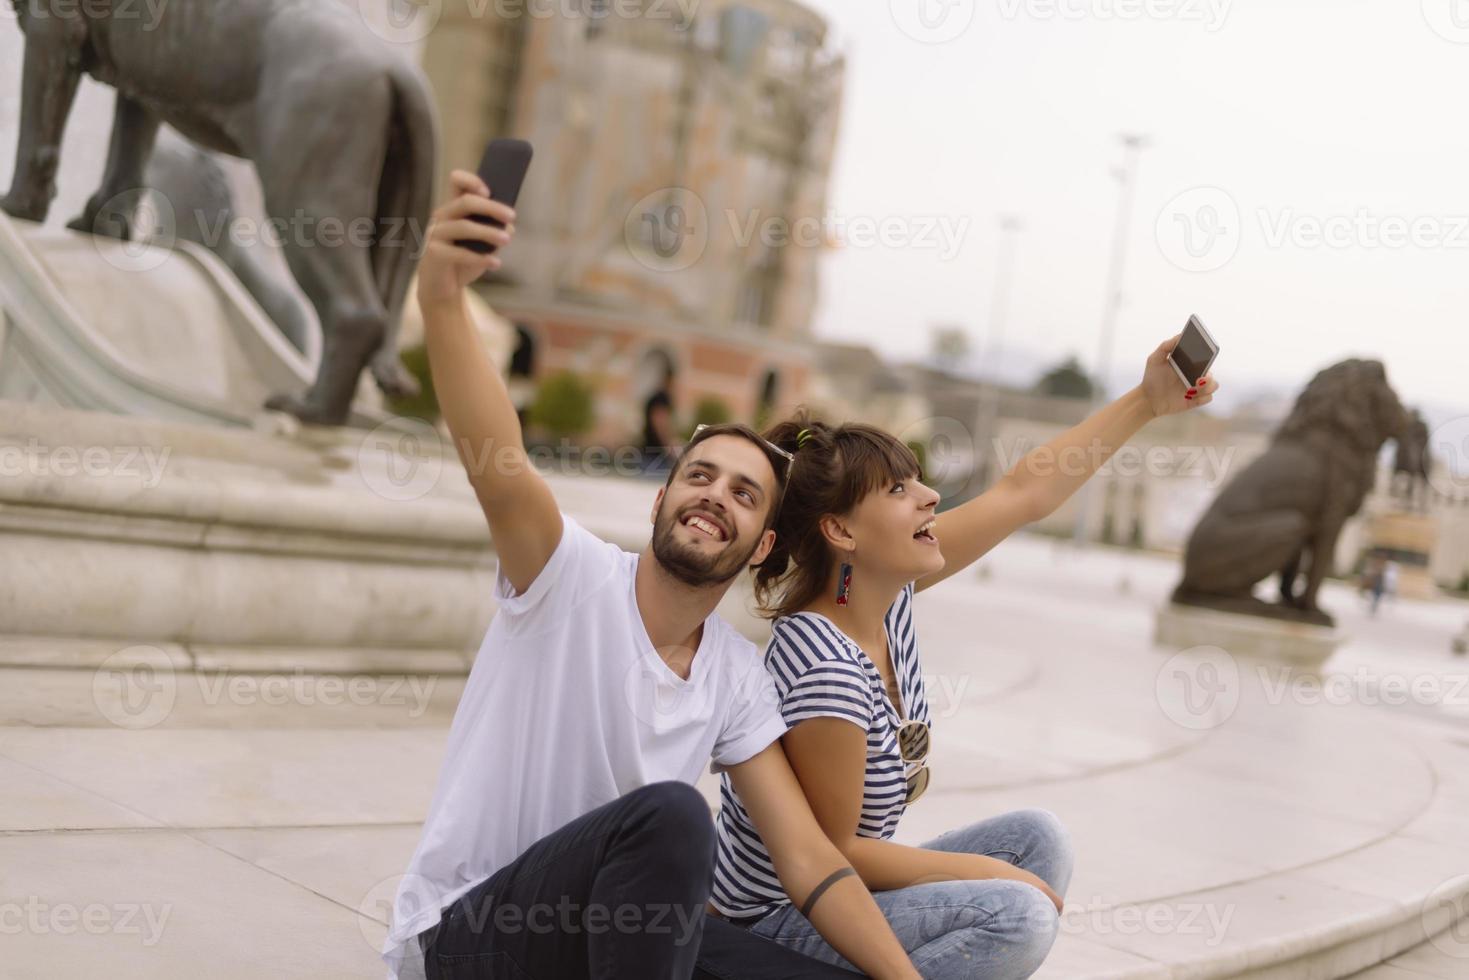 Couple of tourists having fun walking on city street at holiday - Happy friends laughing together on vacation - People and holidays concept photo